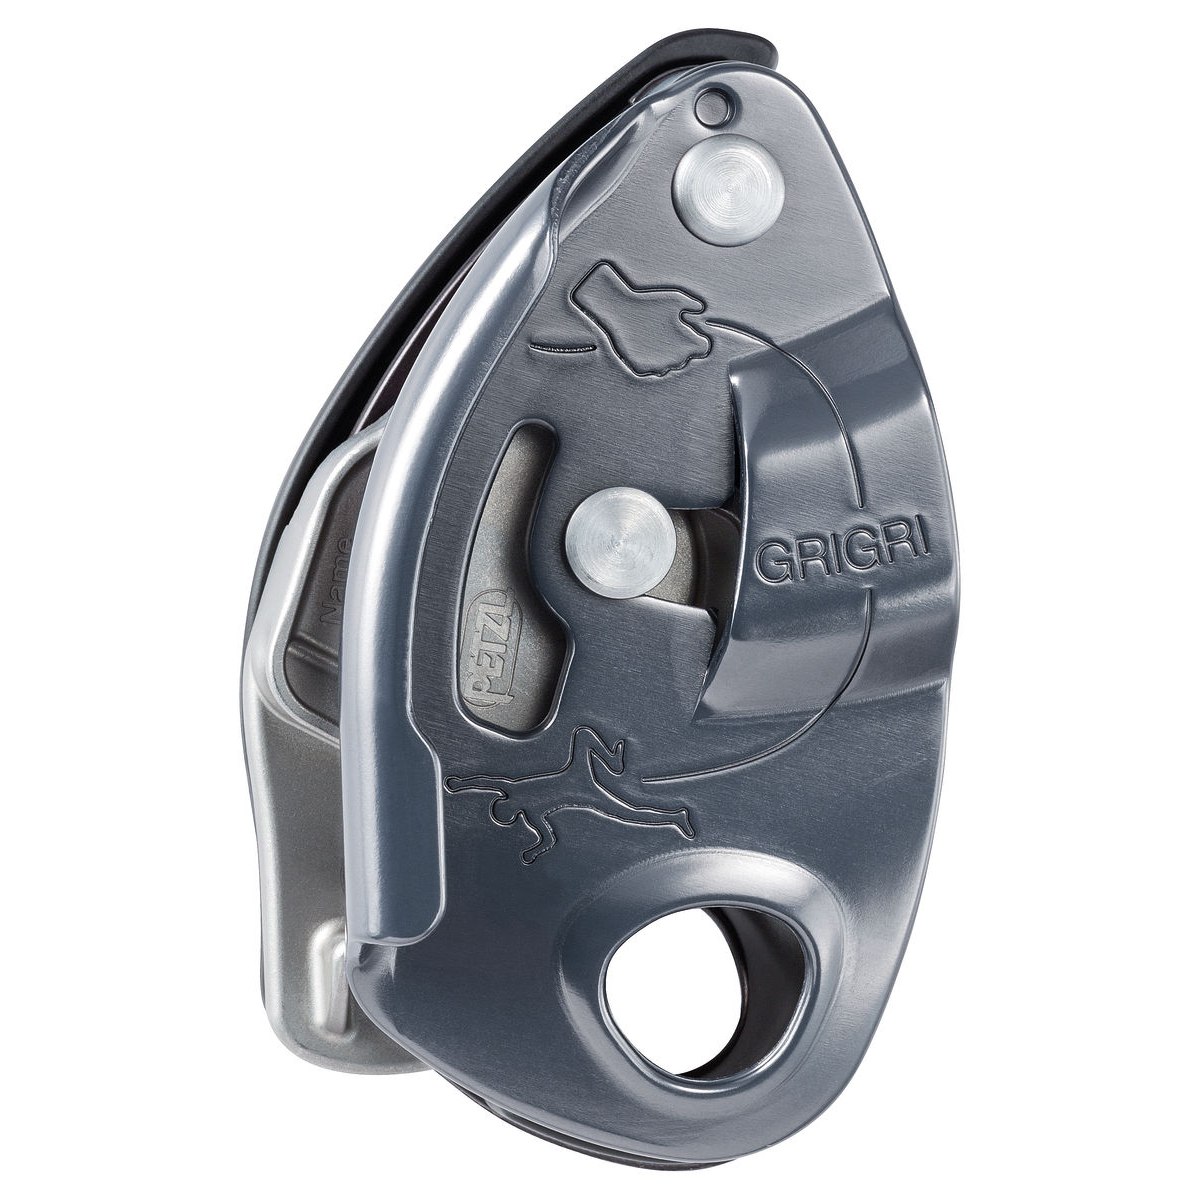 Picture of Petzl GRIGRI Belay Device - grey